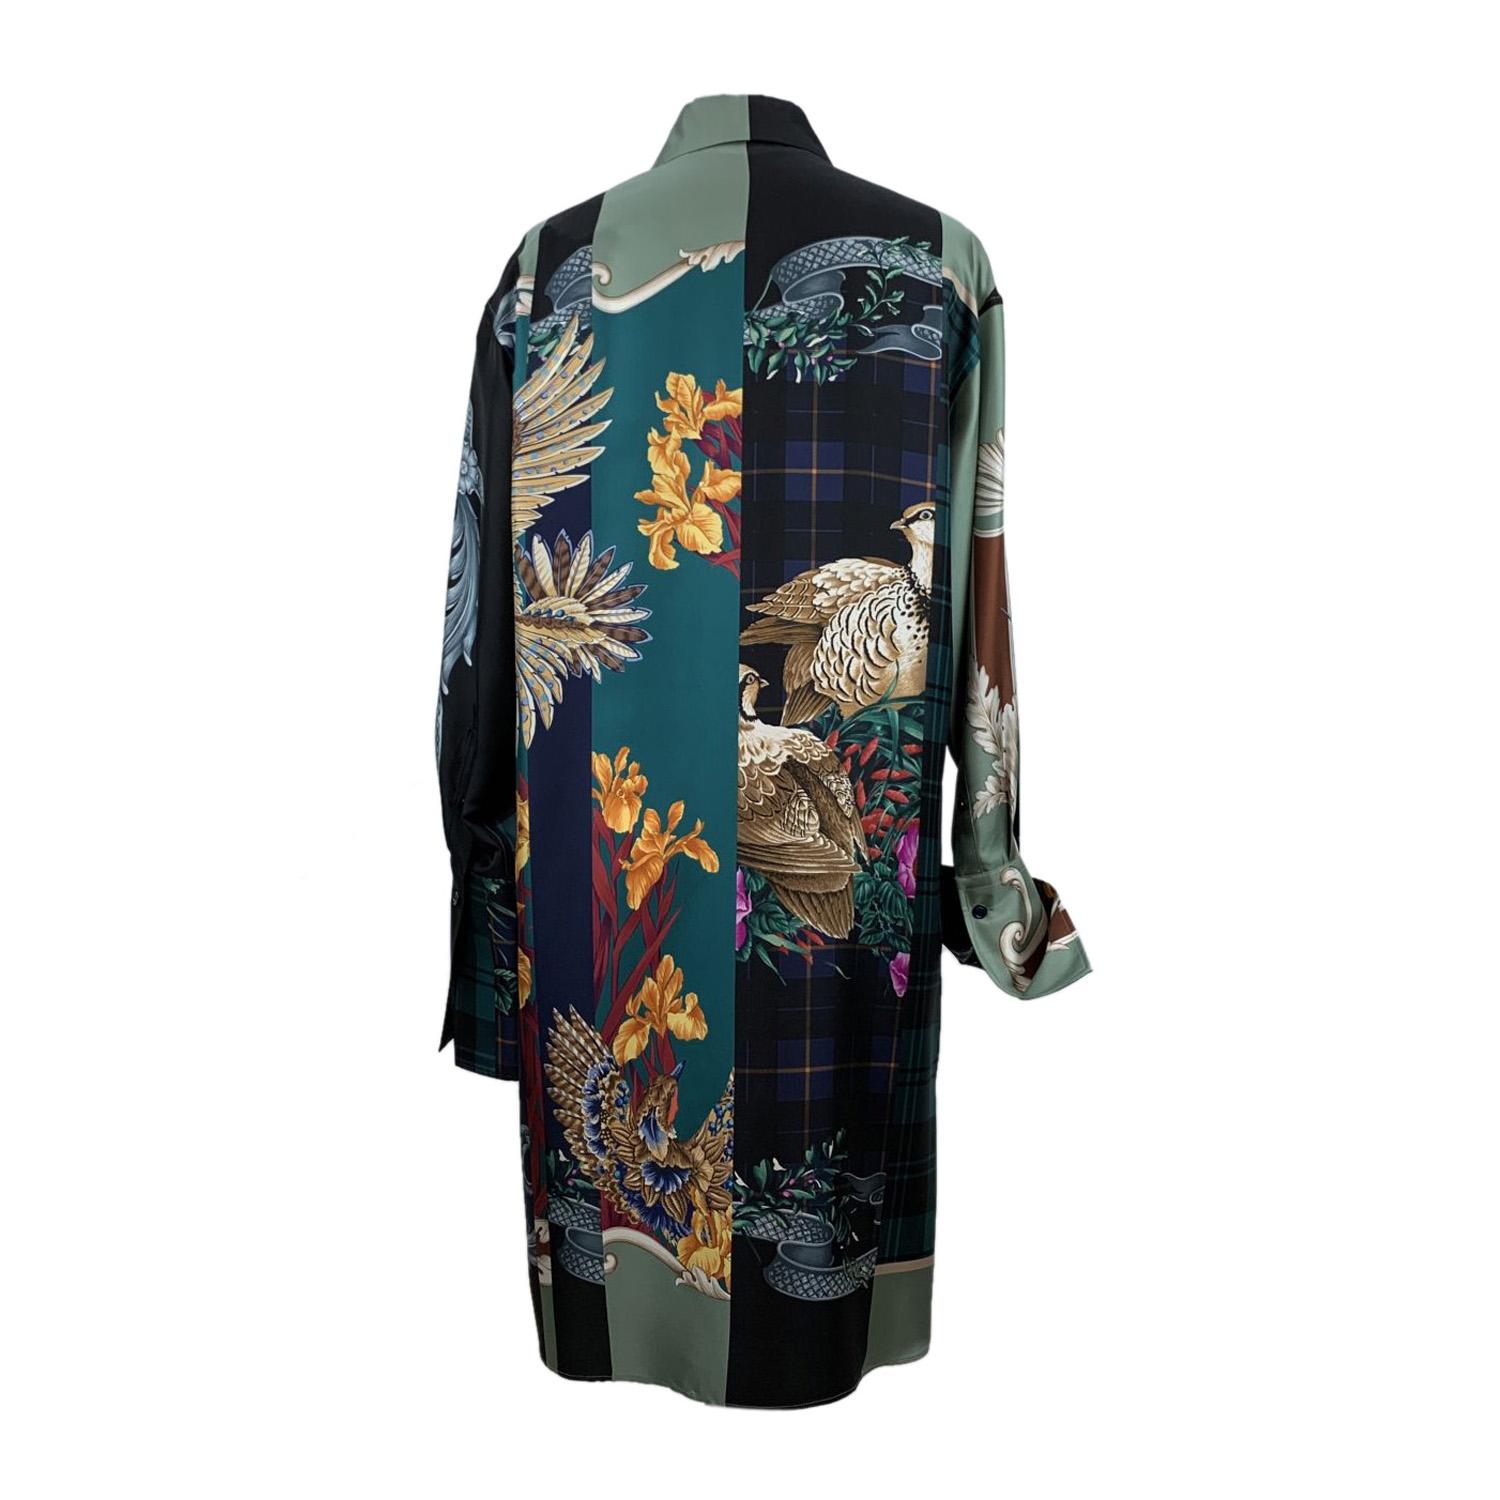 Salvatore Ferragamo multicolor patchwork printed long-line shirt. Pointed collar. Long sleeve styling with buttoned cuffs. Button placket. Side slits. Composition: 100% silk. Can also be used as a dress. Size: 38 IT (The size shown for this item is